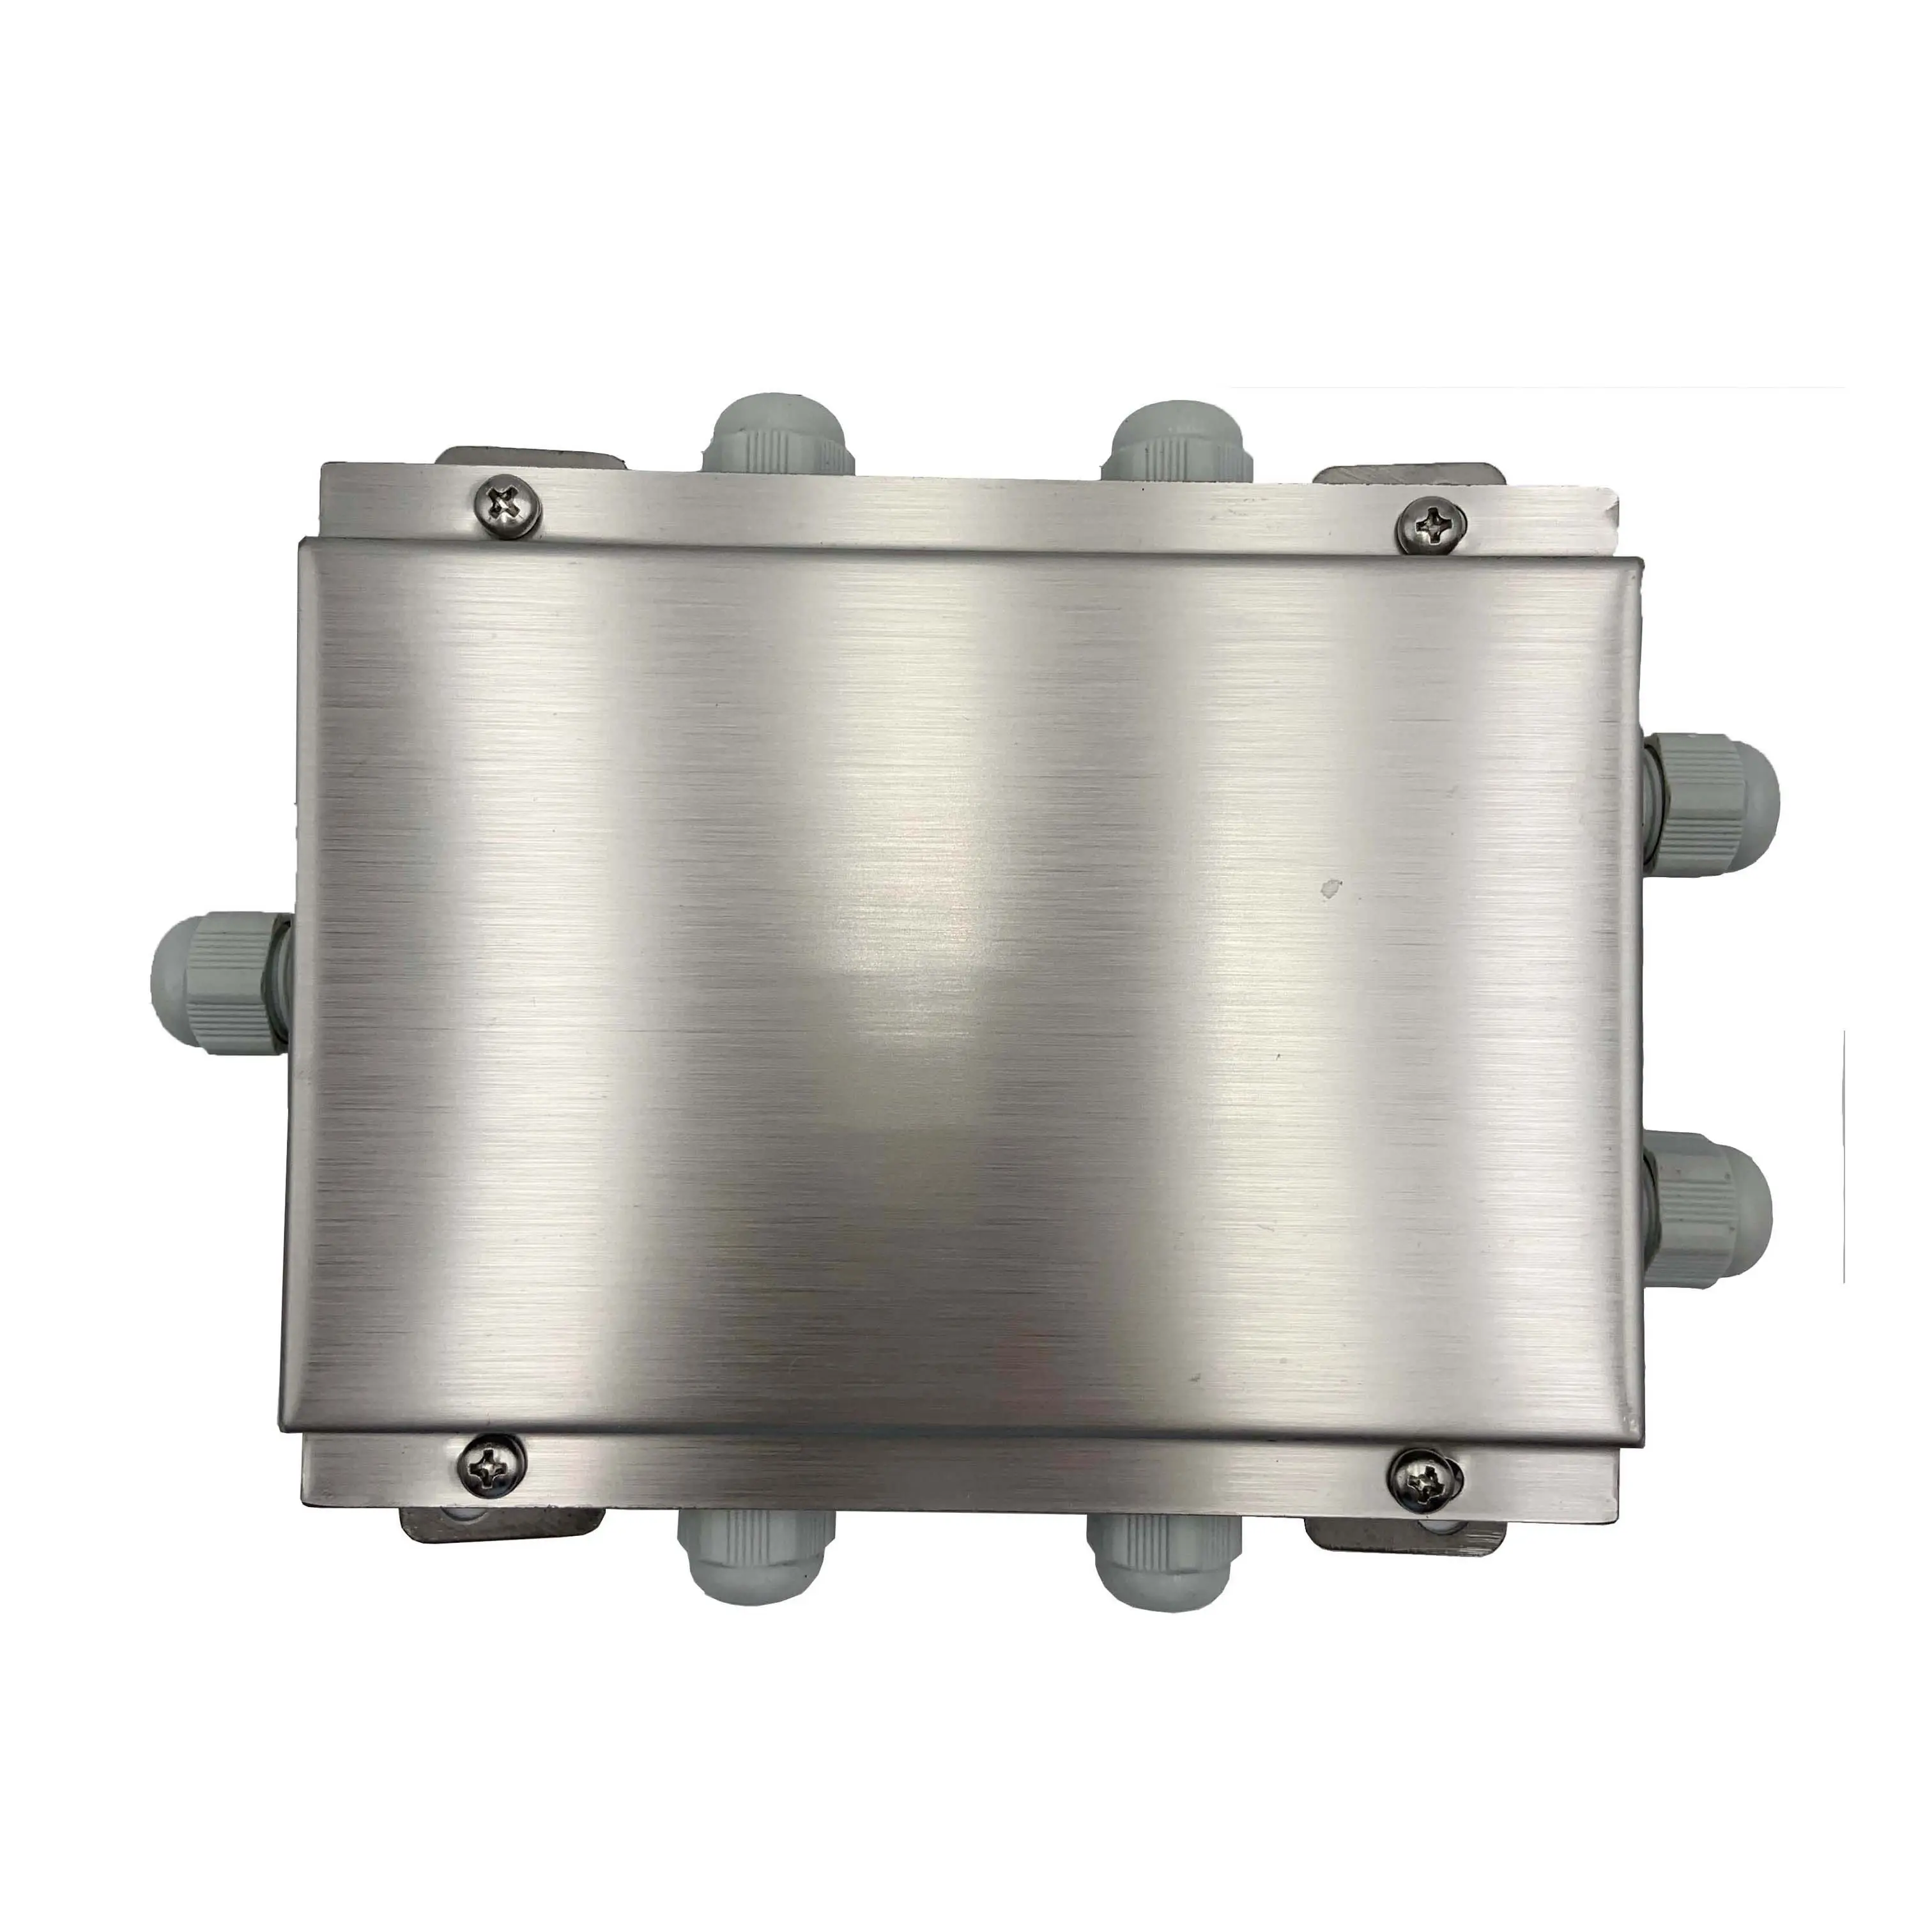 Stainless Steel Material Ip68 JBX-6 Load Cell Junction Box Electric Meter Junction Box